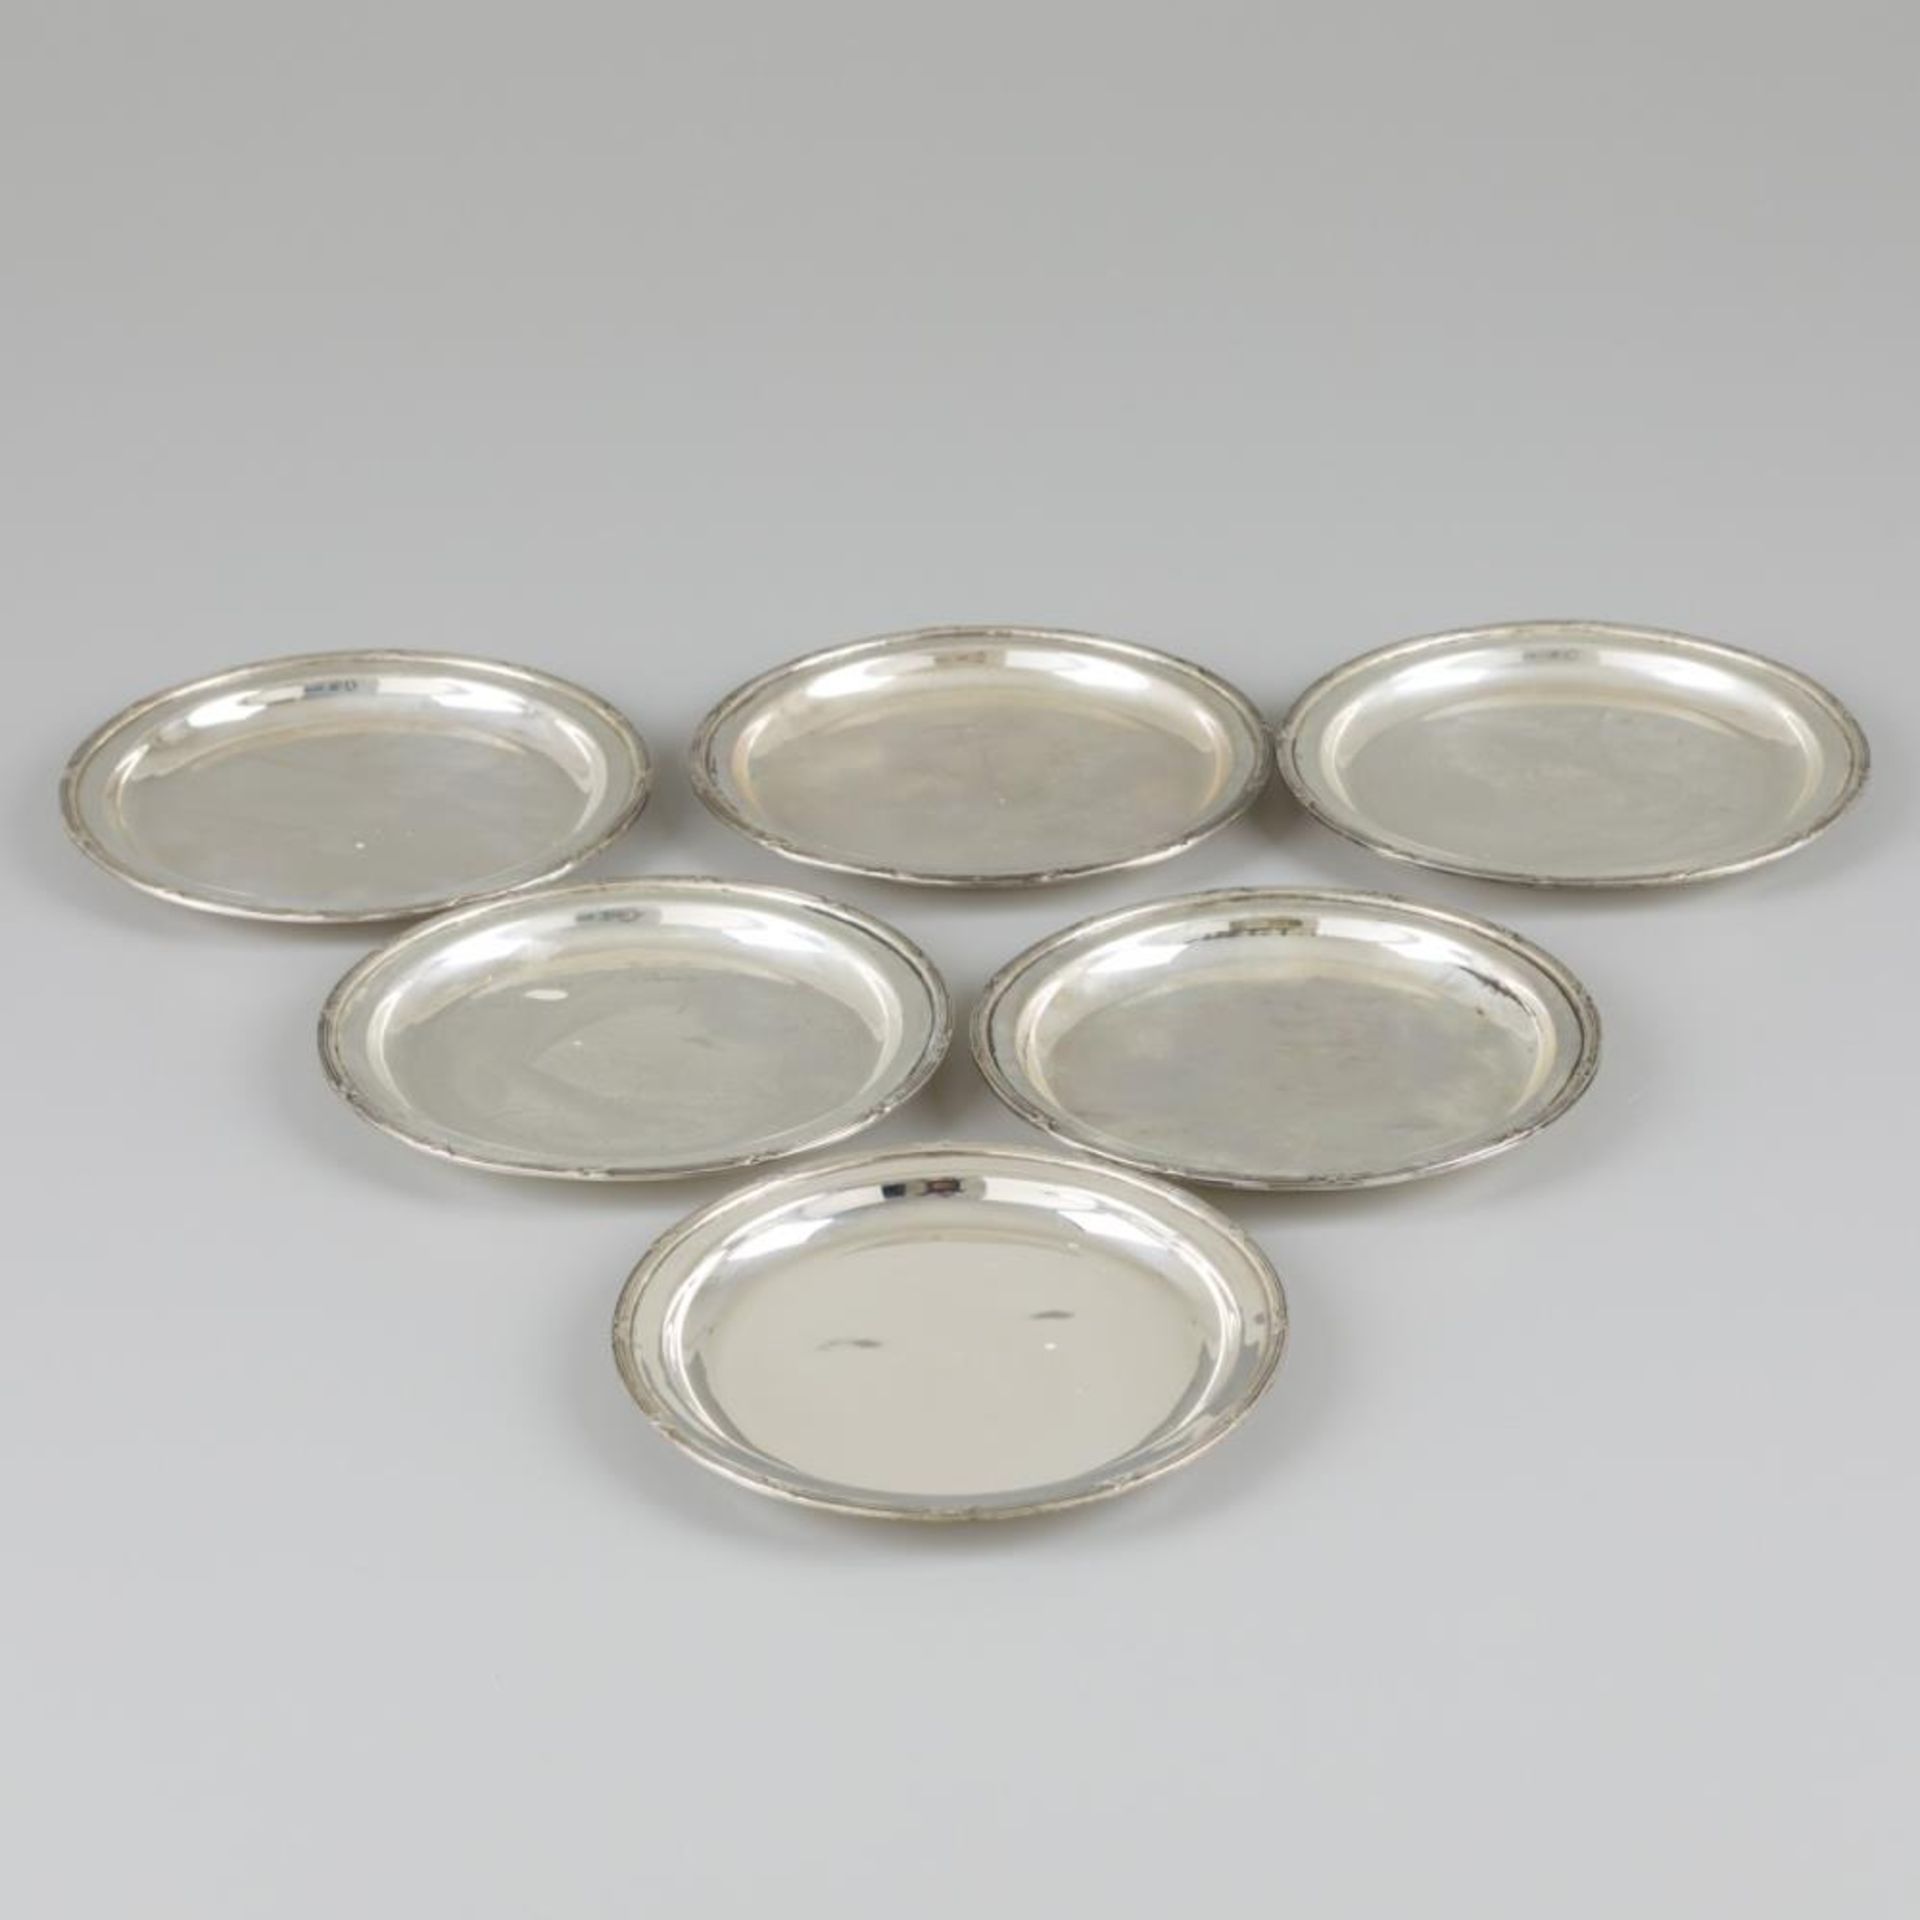 6-piece set of coasters silver. - Image 4 of 6